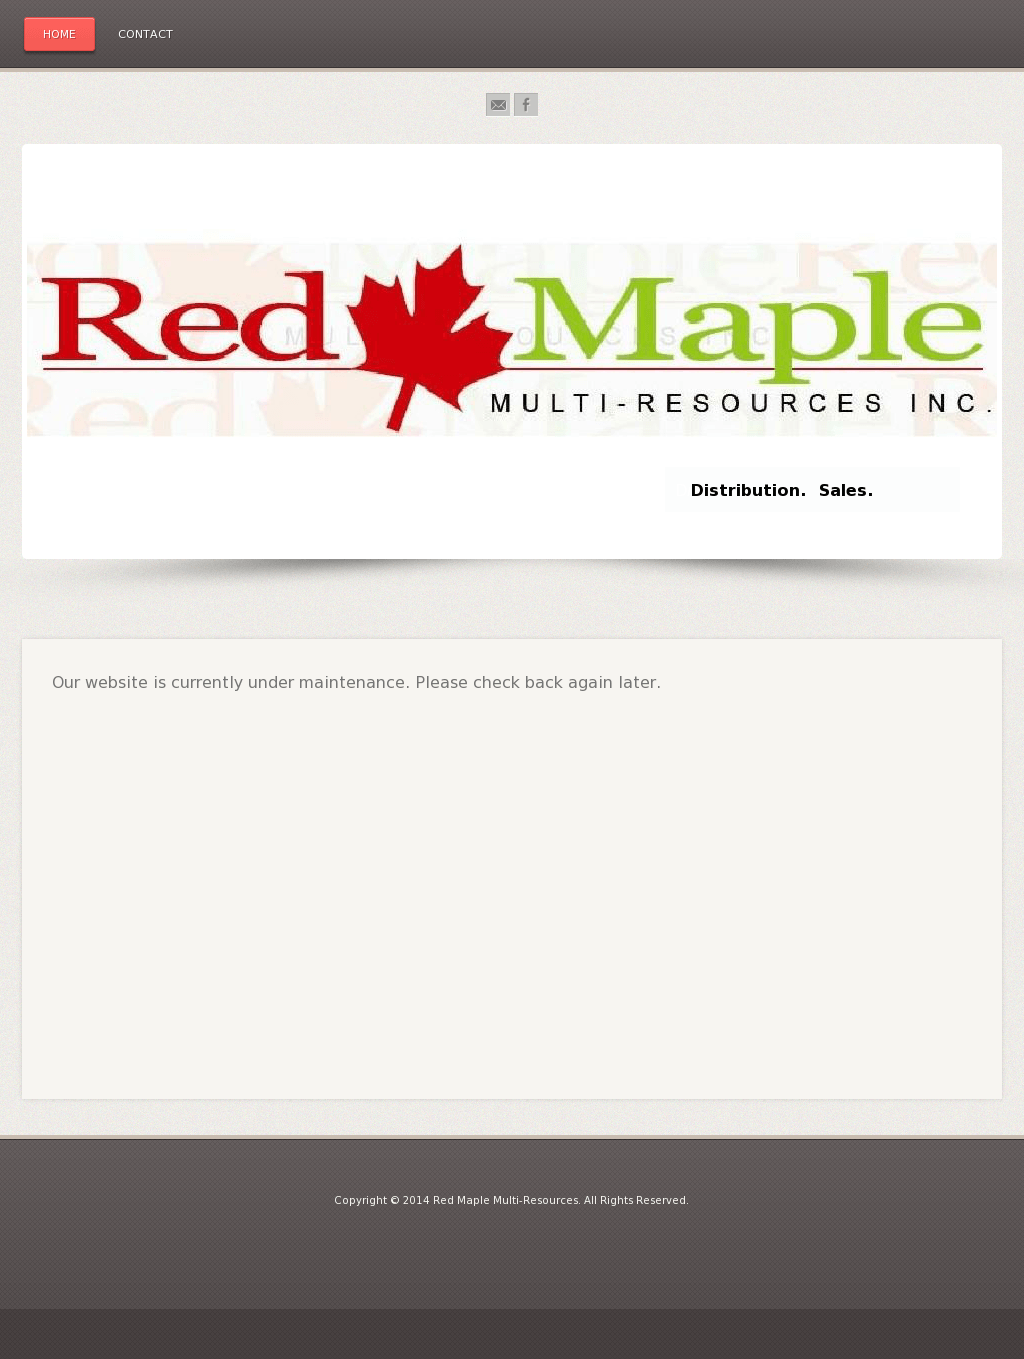 Red Maple Logo - Red Maple Multi-resources Competitors, Revenue and Employees - Owler ...